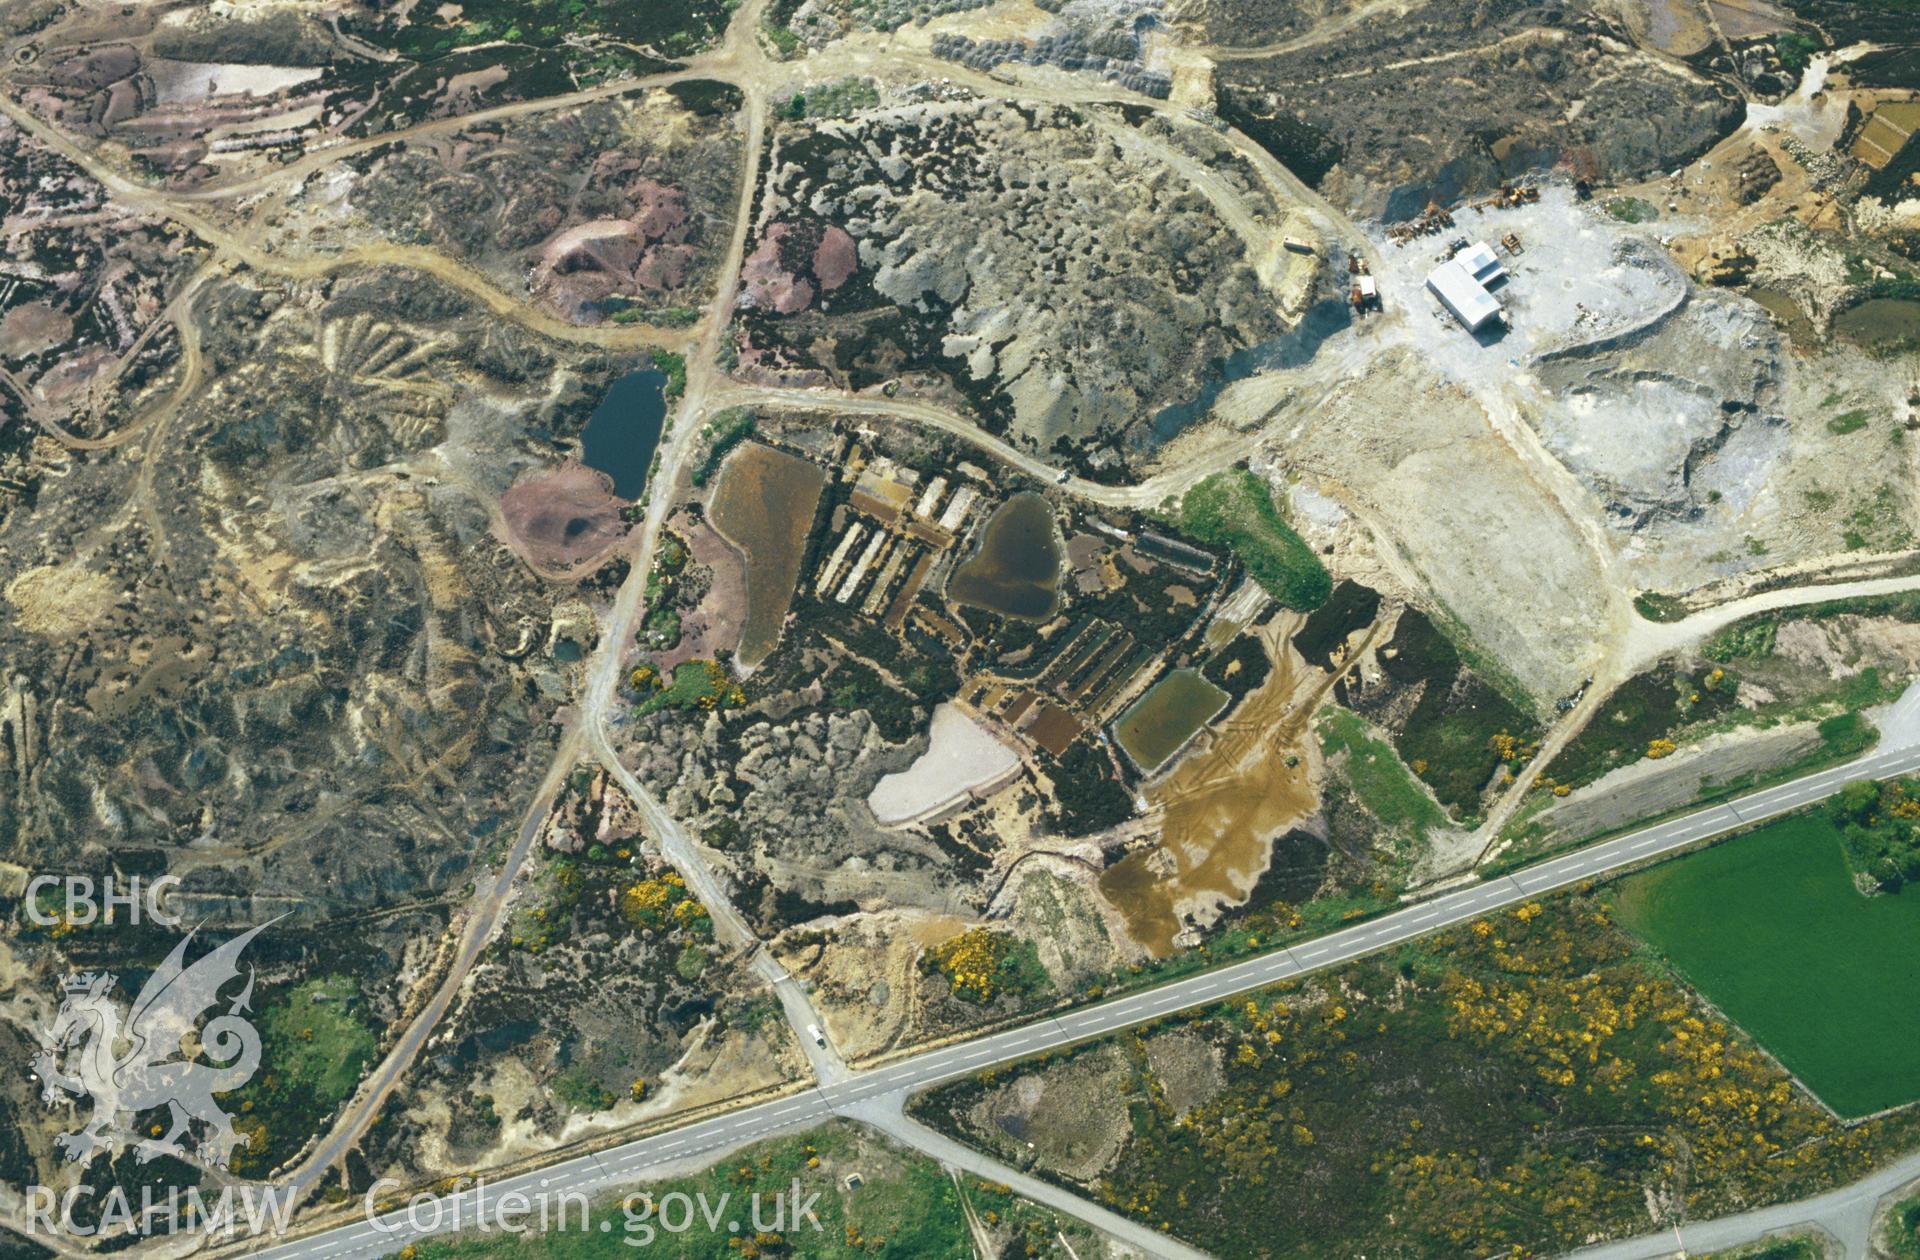 Slide of RCAHMW colour oblique aerial photograph of Parys Mountain Copper Mines, Amlwch, taken by C.R. Musson, 30/5/1994.